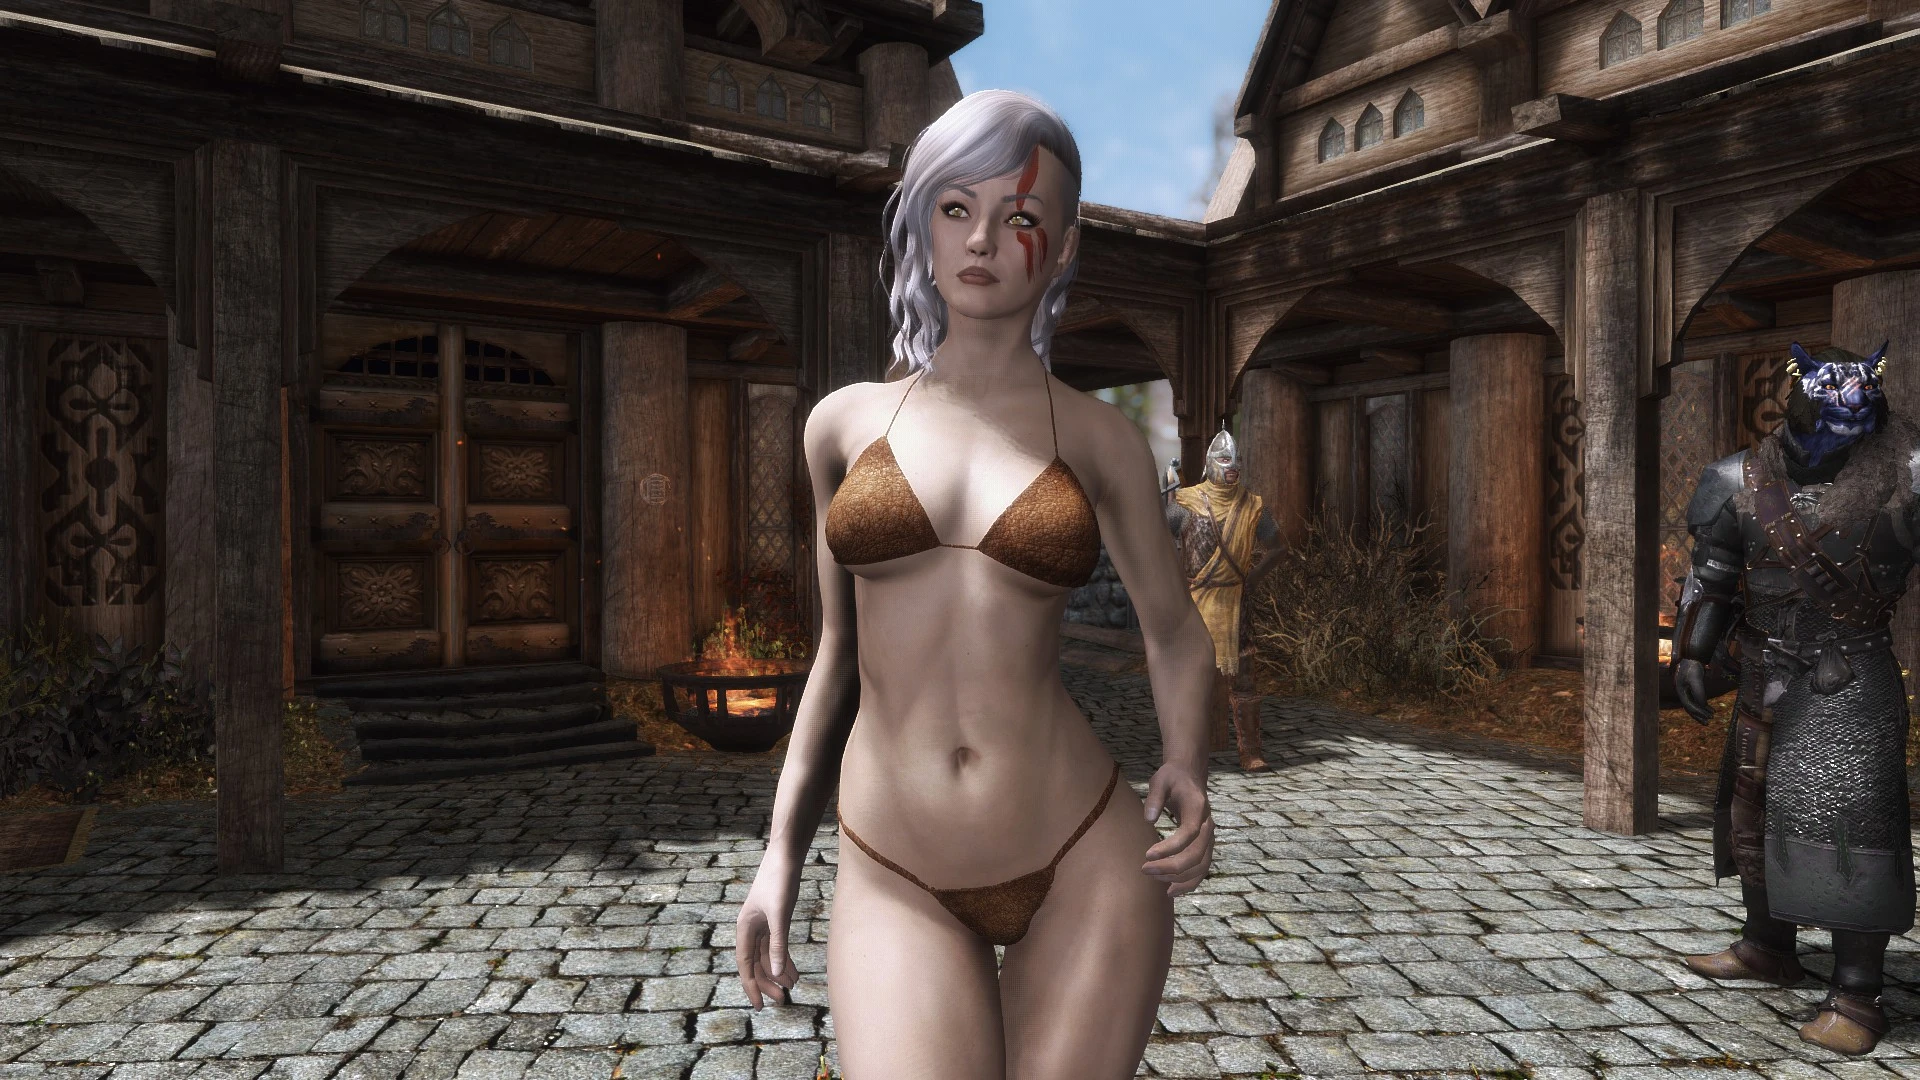 unp at skyrim special, babes and blood the most popular nsfw mods on skyrim...